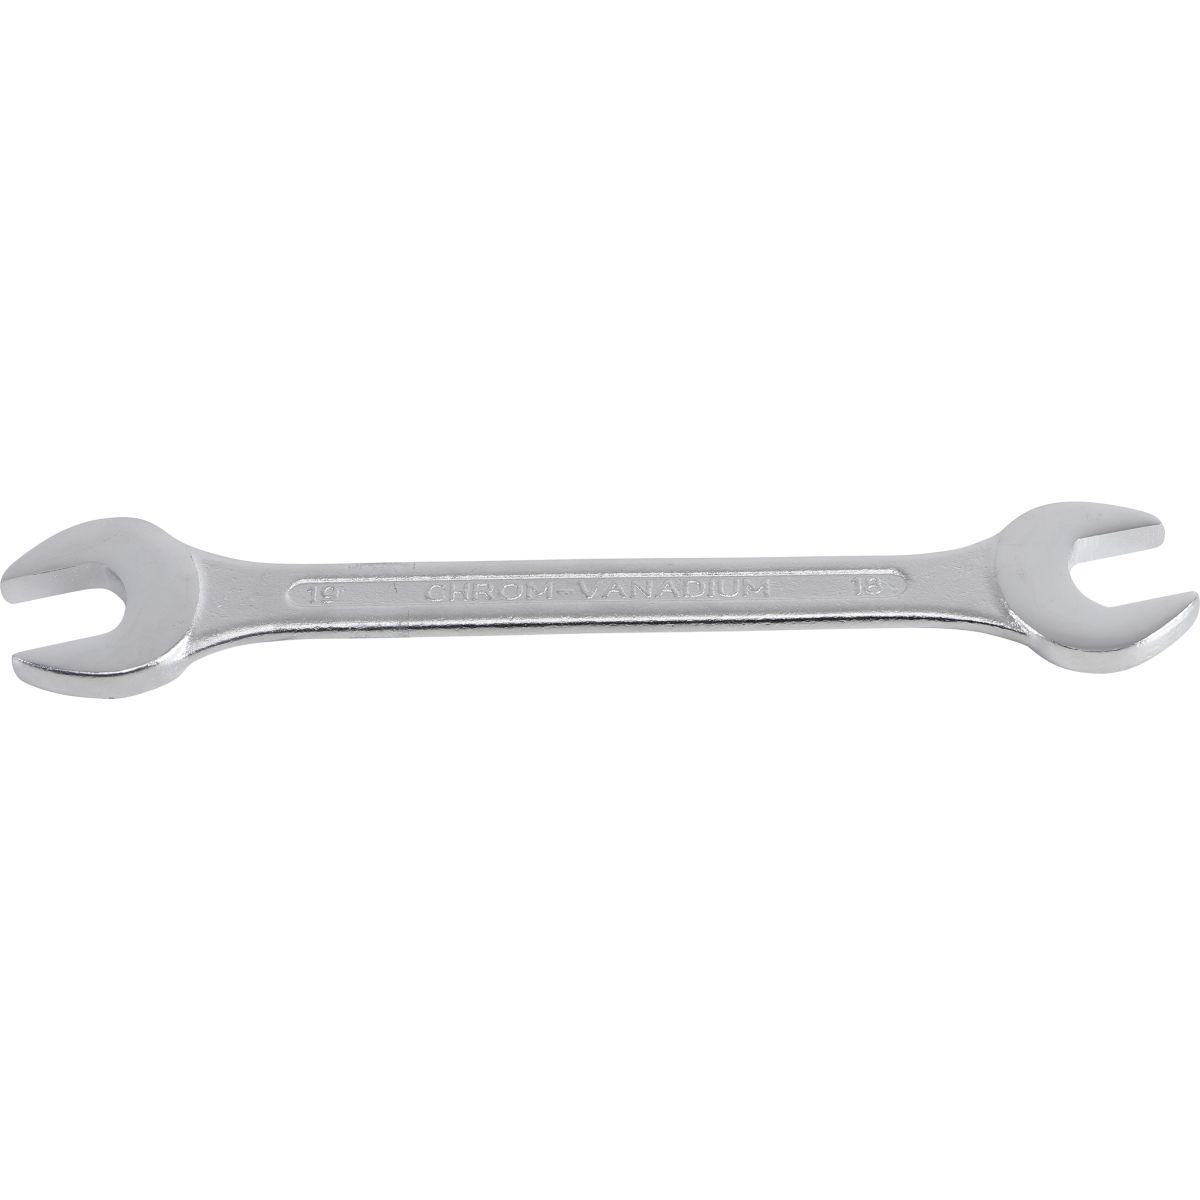 Double Open End Spanner | 18 x 19 mm